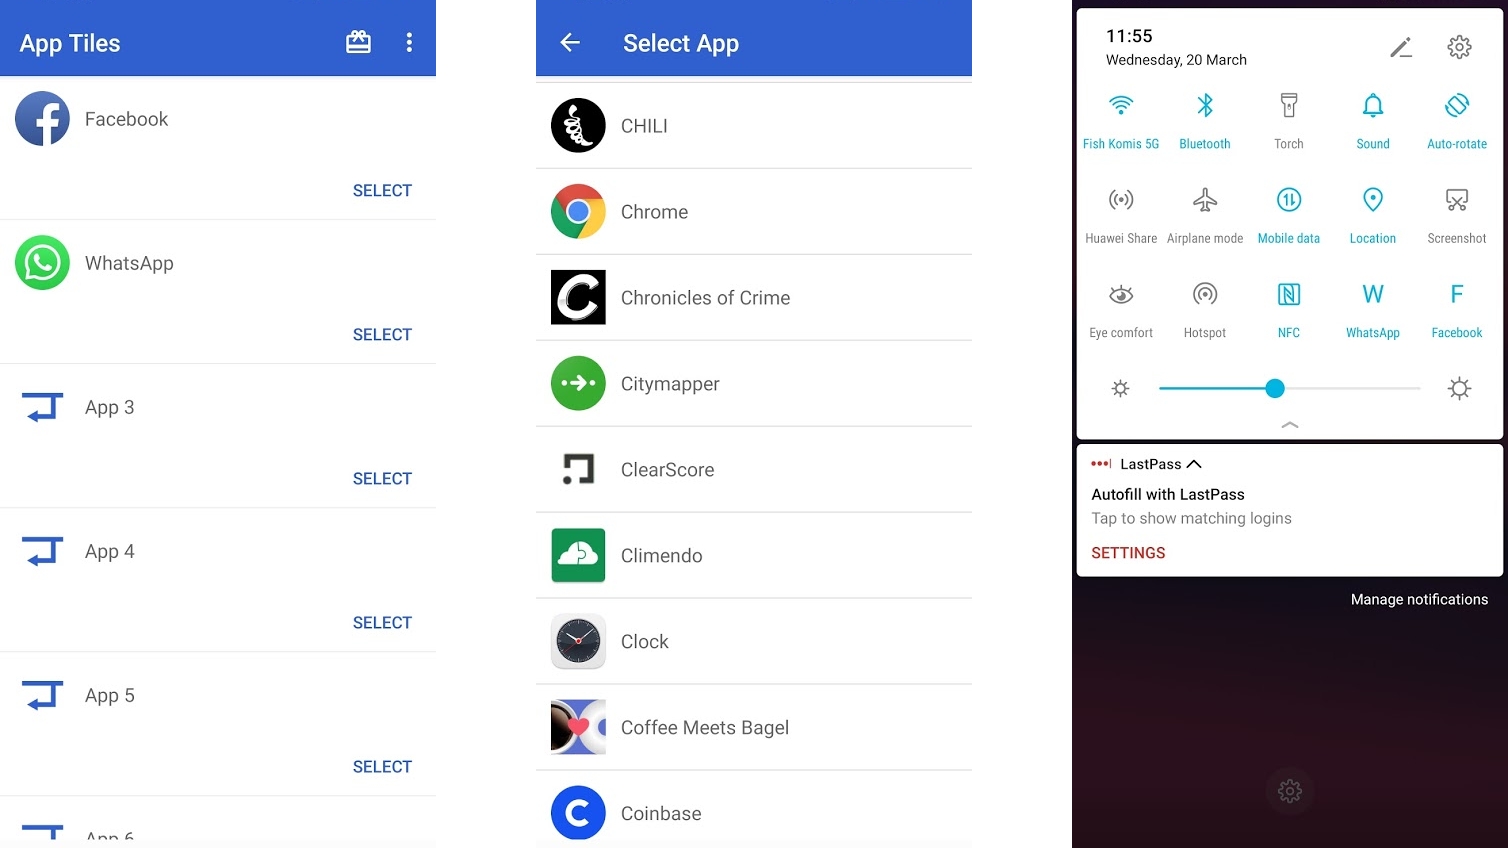 The best free Android apps of 2019 90